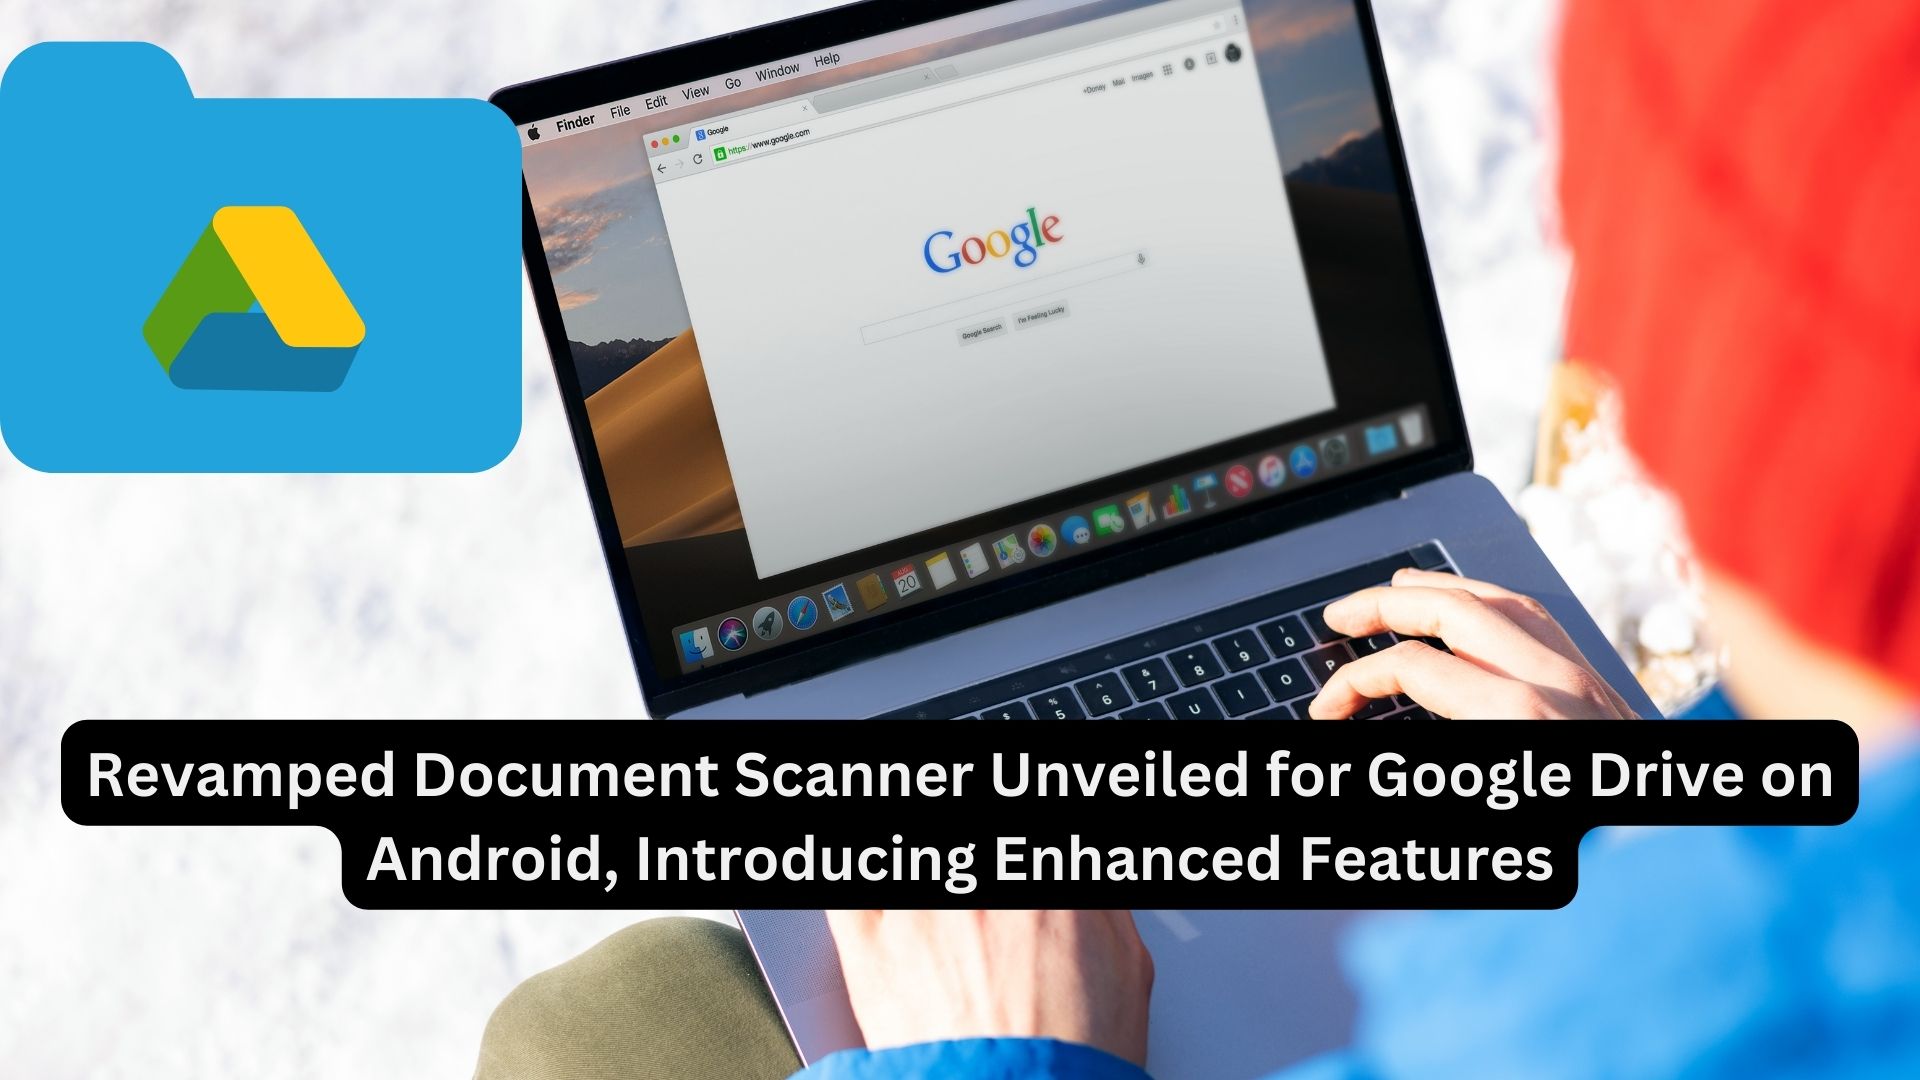 Revamped Document Scanner Unveiled for Google Drive on Android, Introducing Enhanced Features